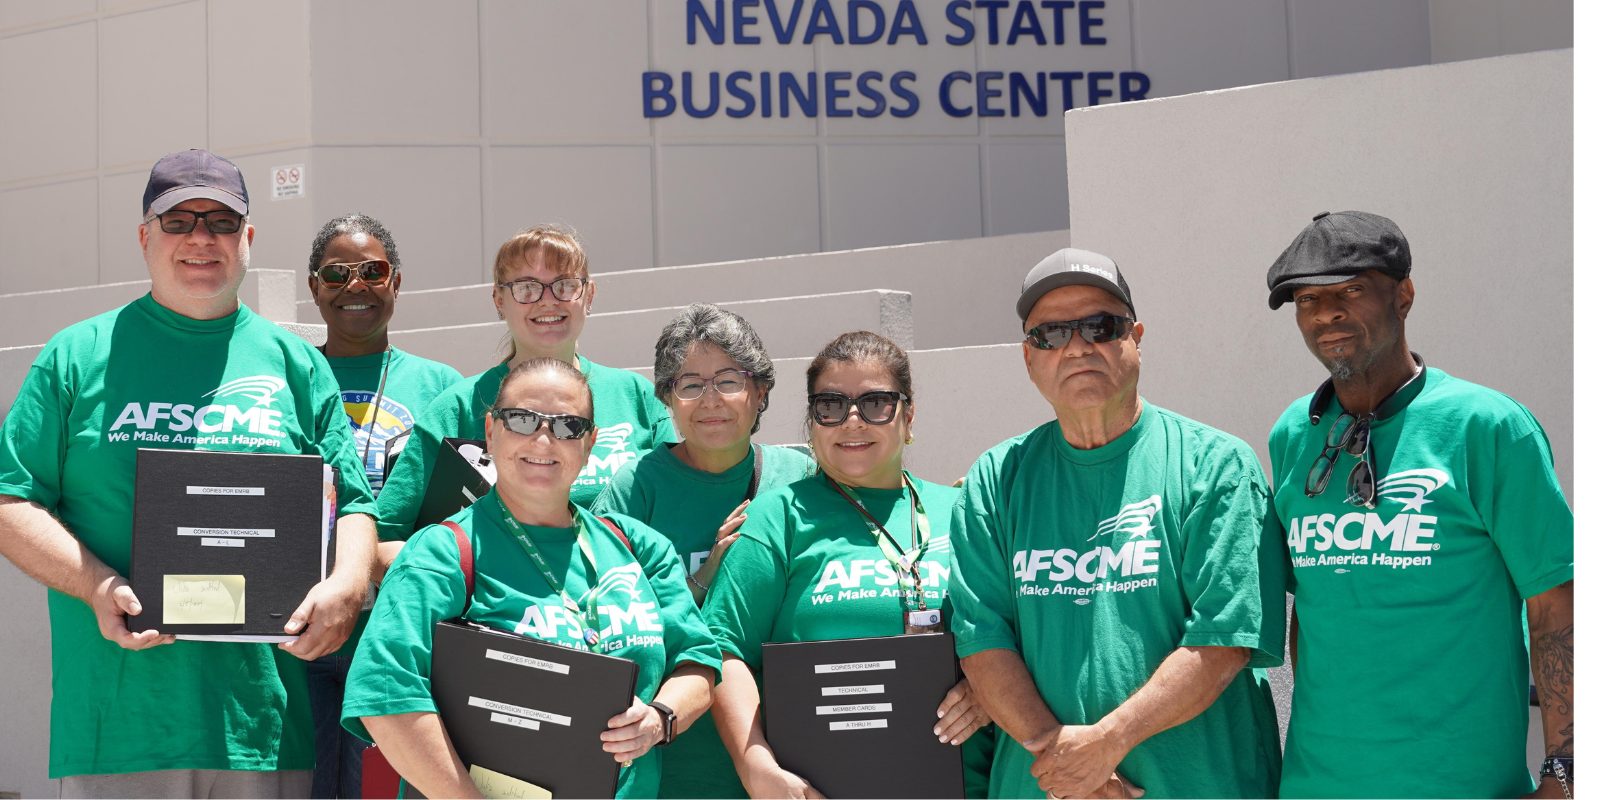 Thousands of additional Nevada state employees file for AFSCME union election 